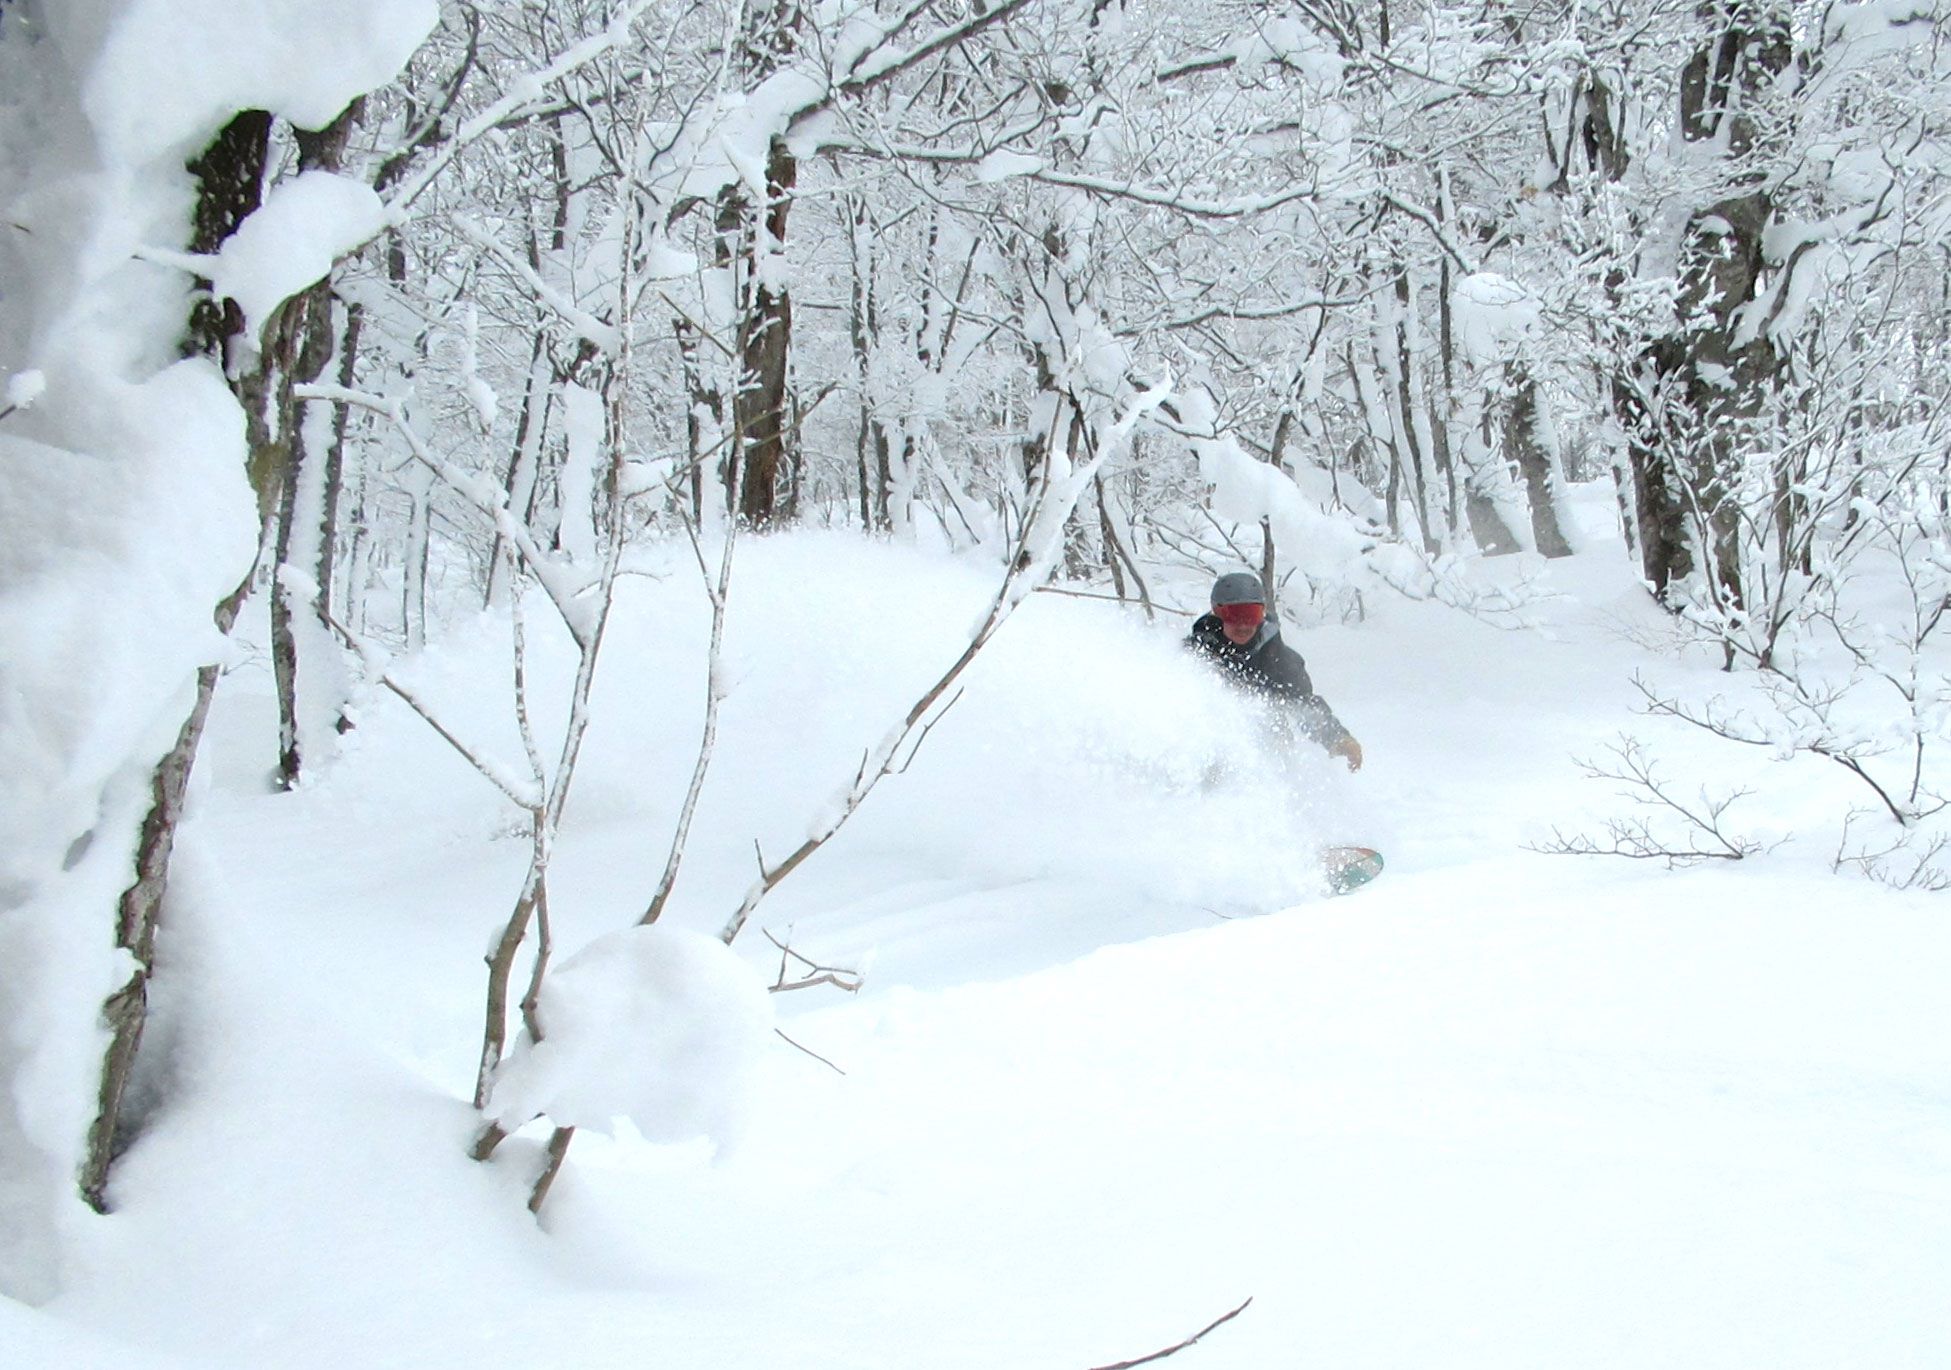 Our guide finding plenty of pow stashes